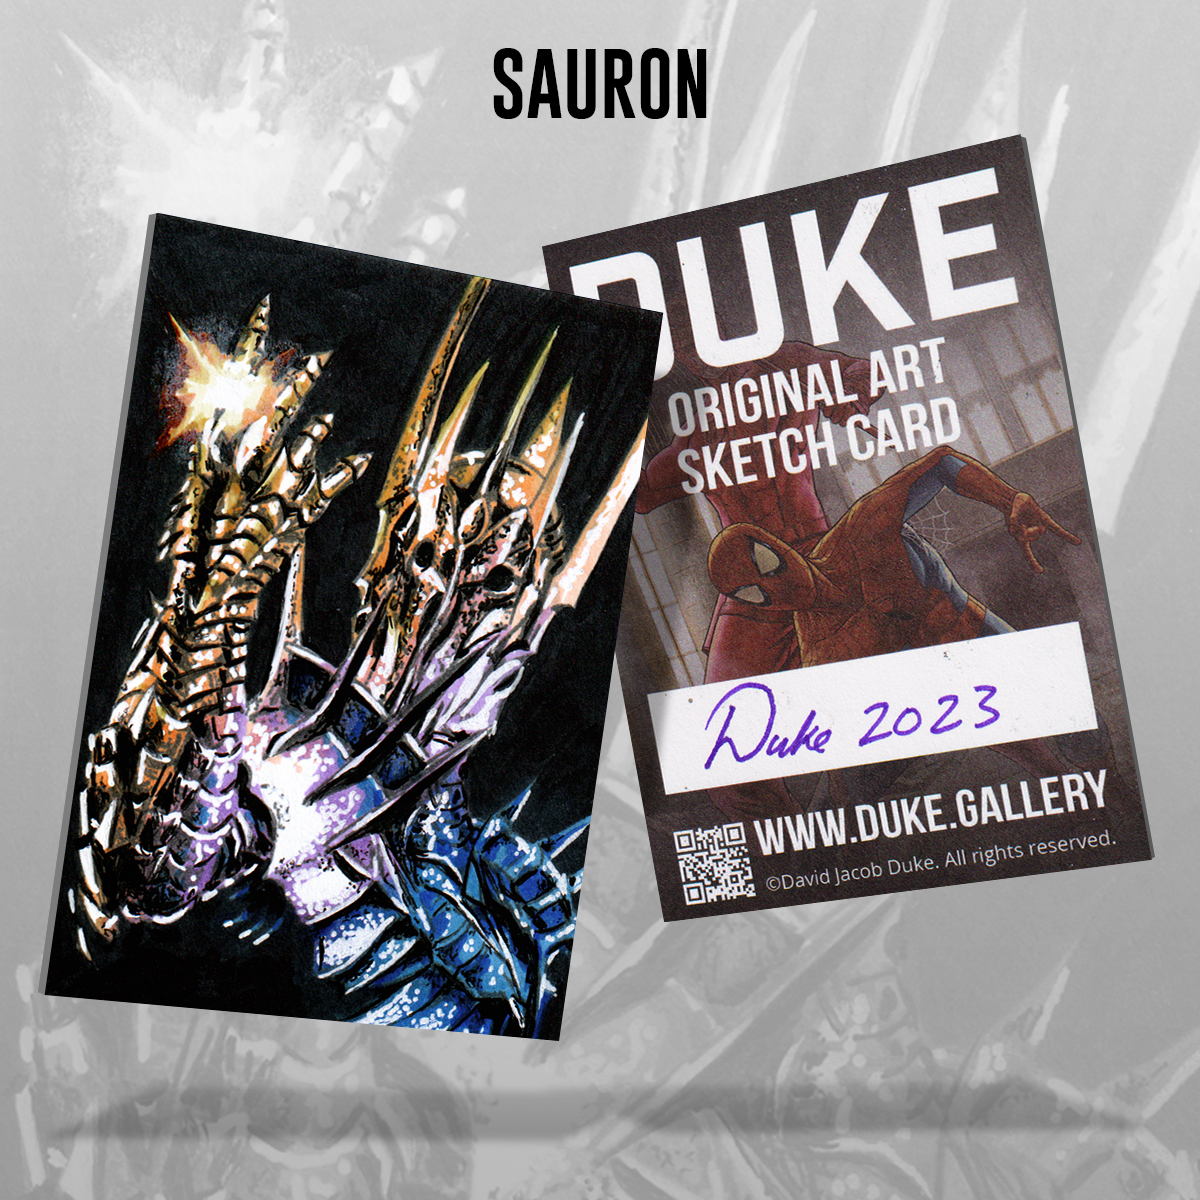 Lord of the Rings Sauron Sketch Card by Duke